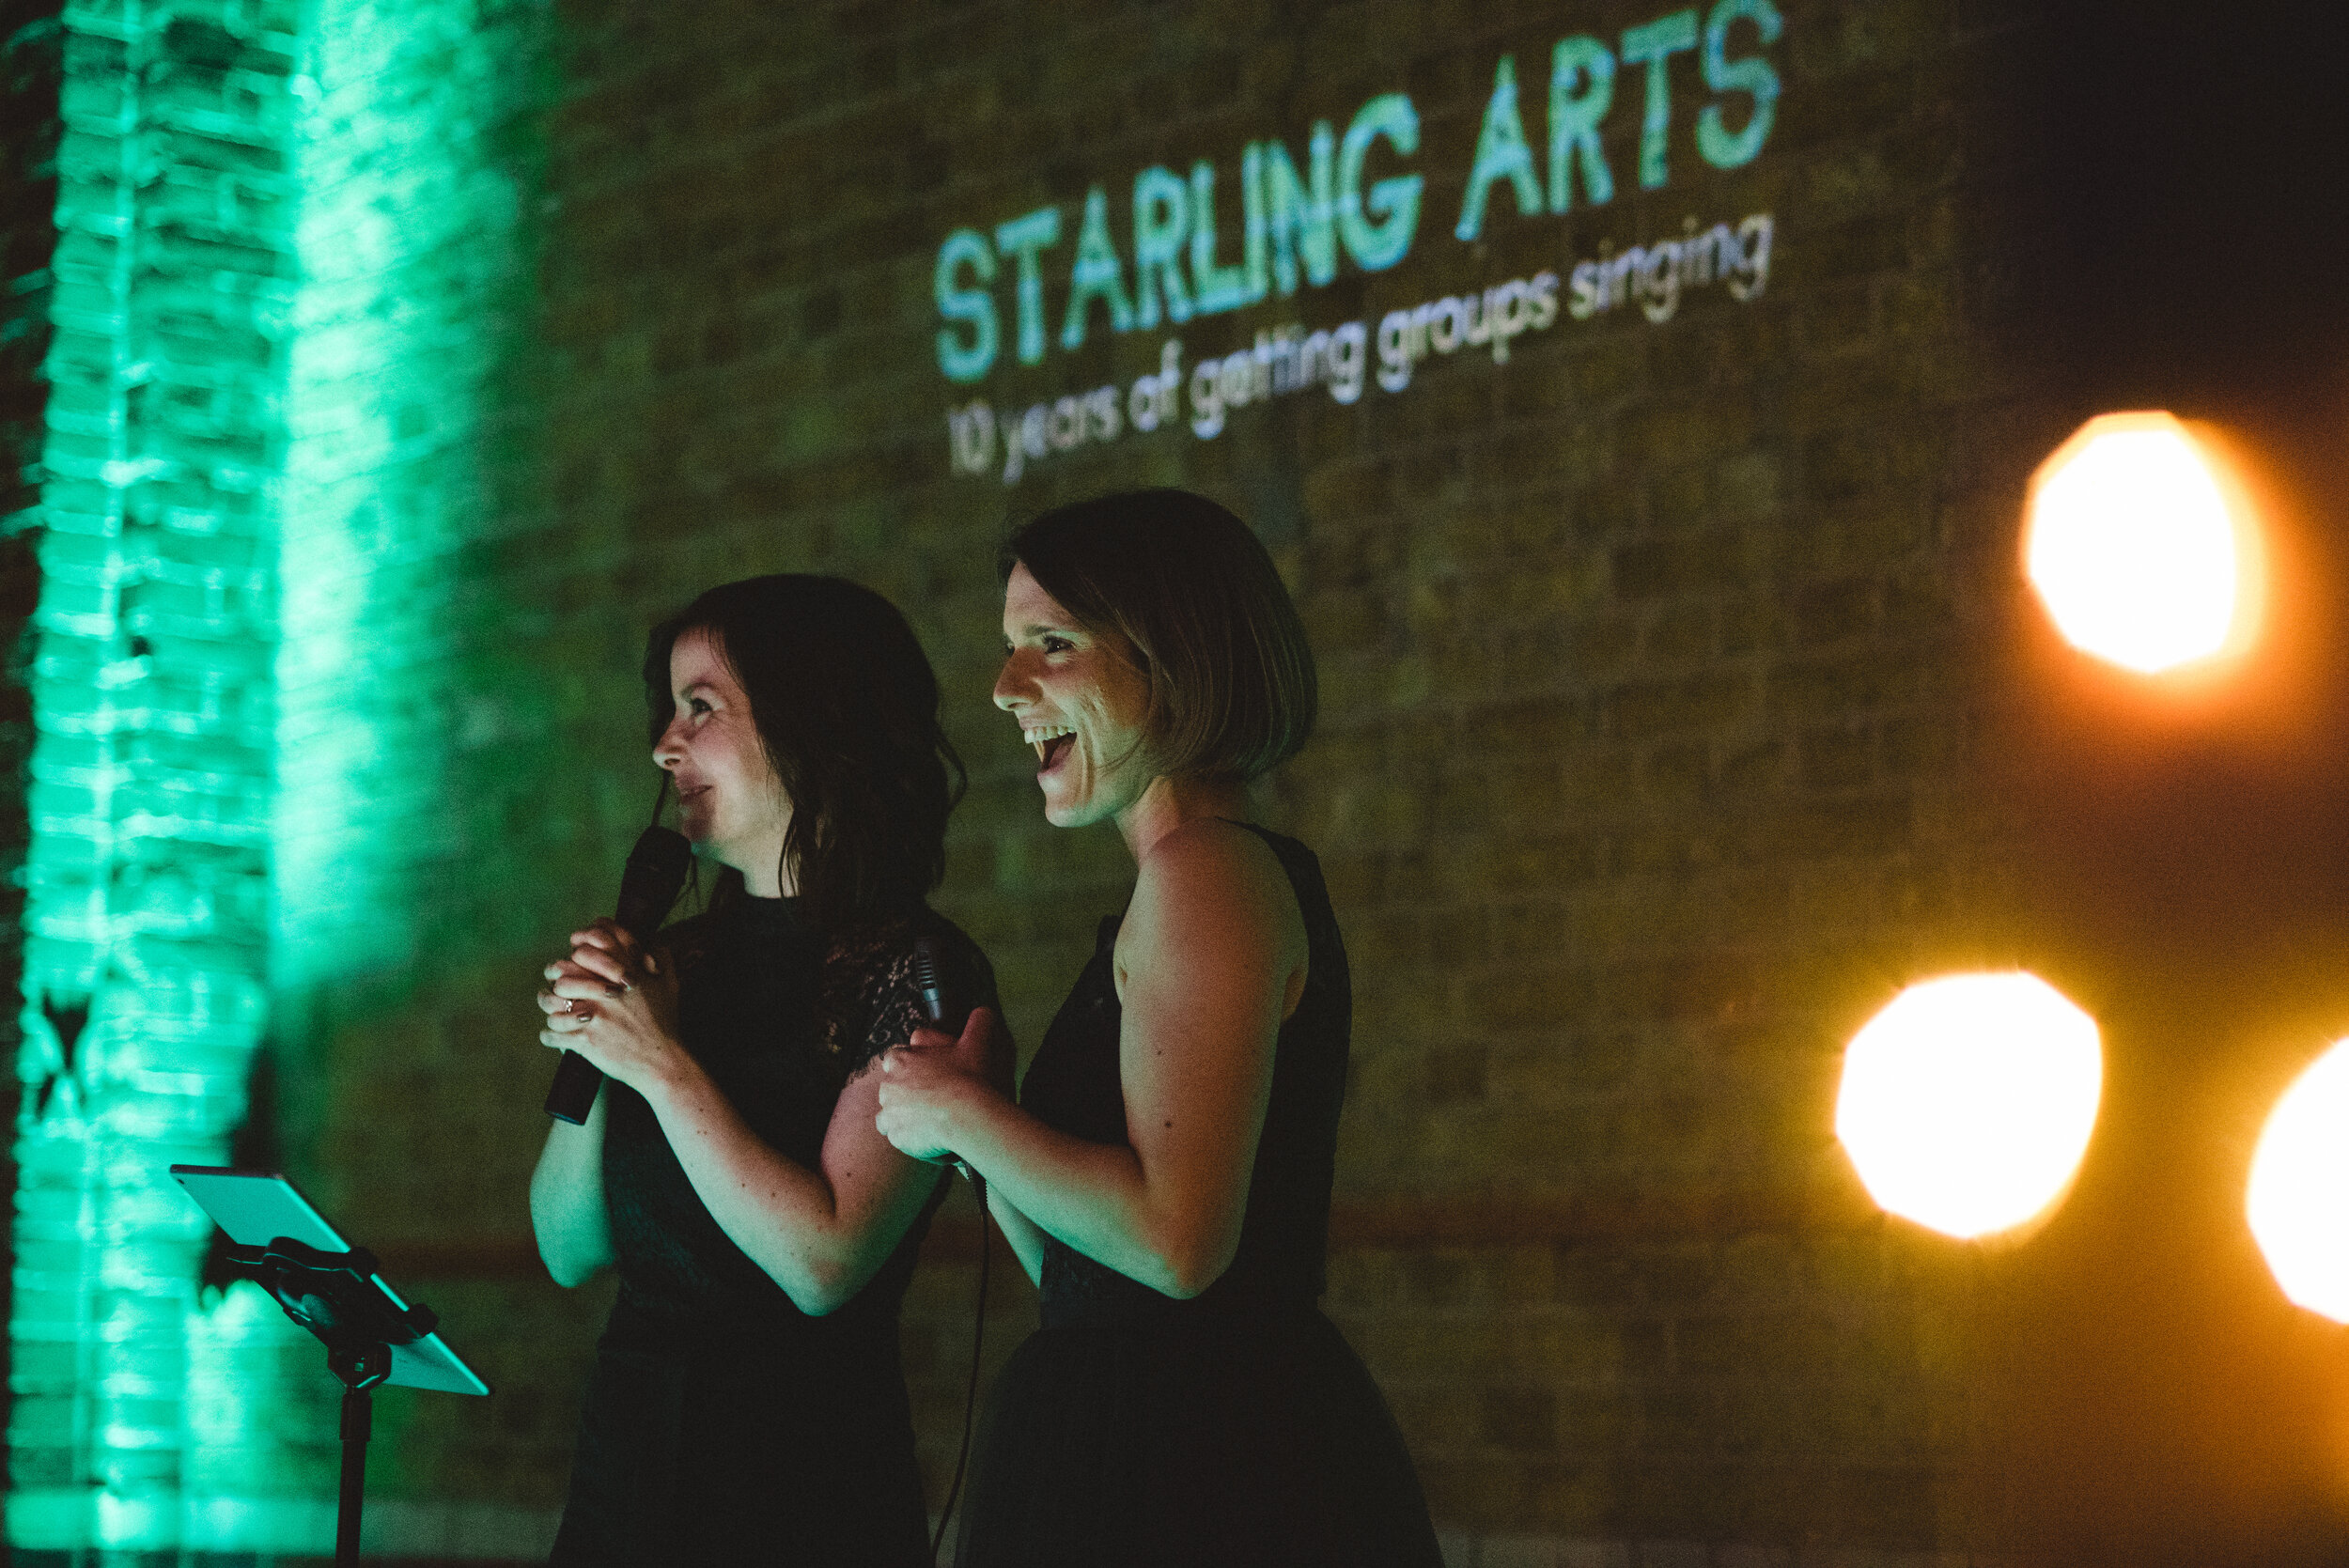 Starling Arts co-directors Anna Shields and Emily Garsin. Photo by Alice the Camera 